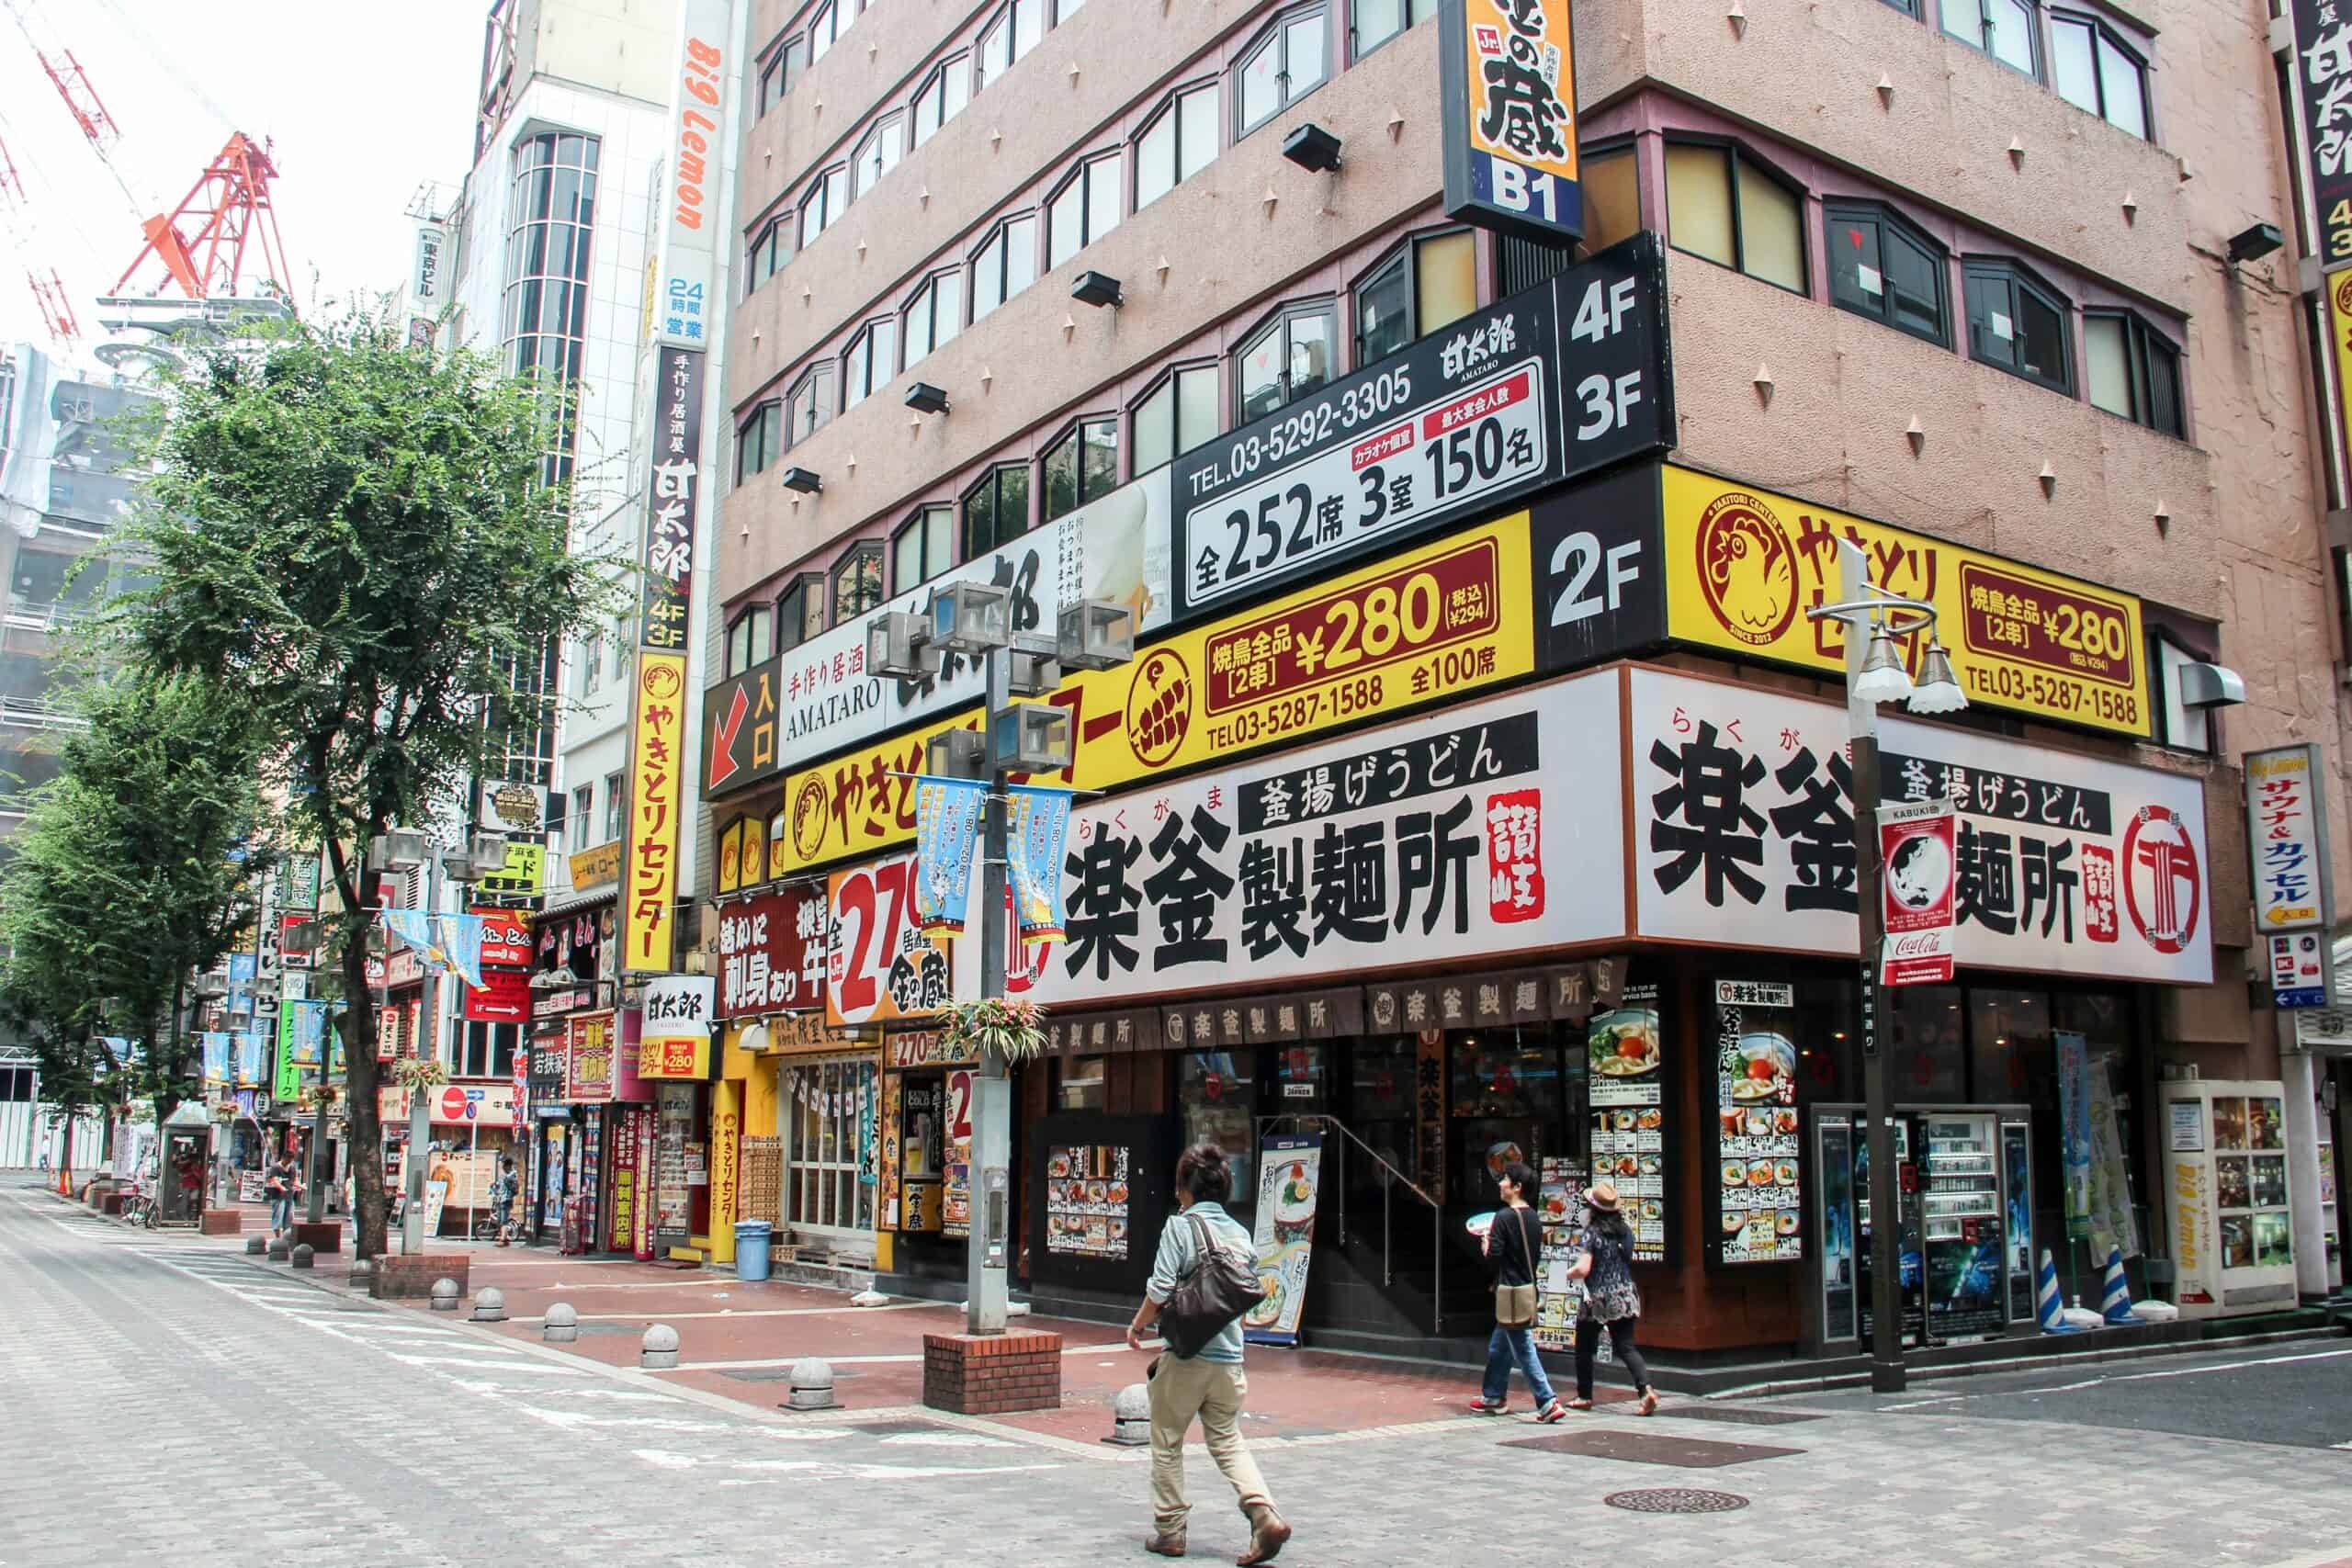 Overt black, white and yellow signage and advertising on buildings in Tokyo.